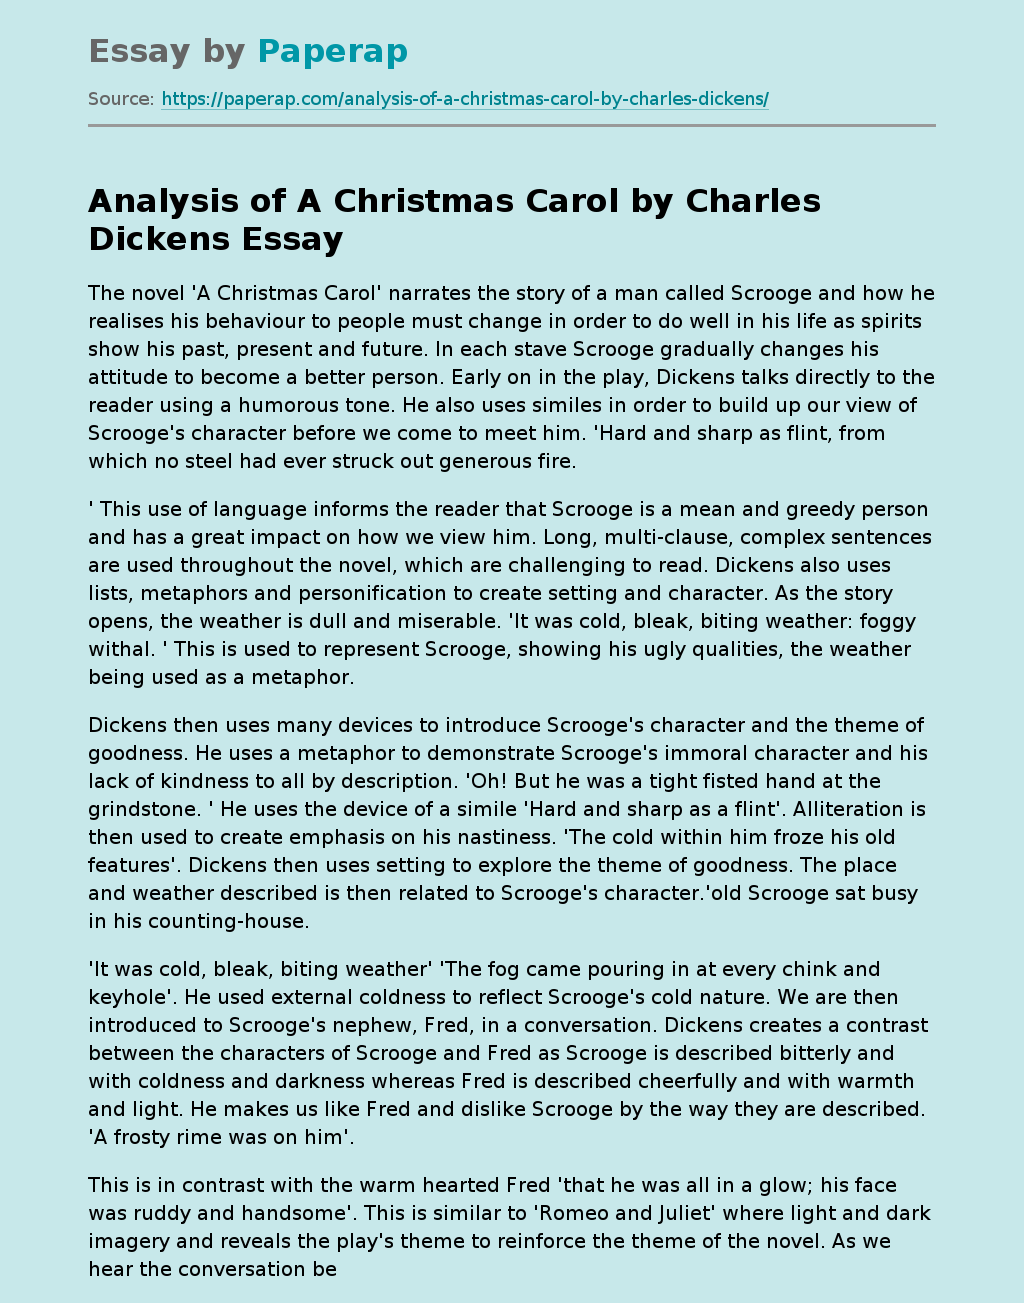 Analysis of A Christmas Carol by Charles Dickens